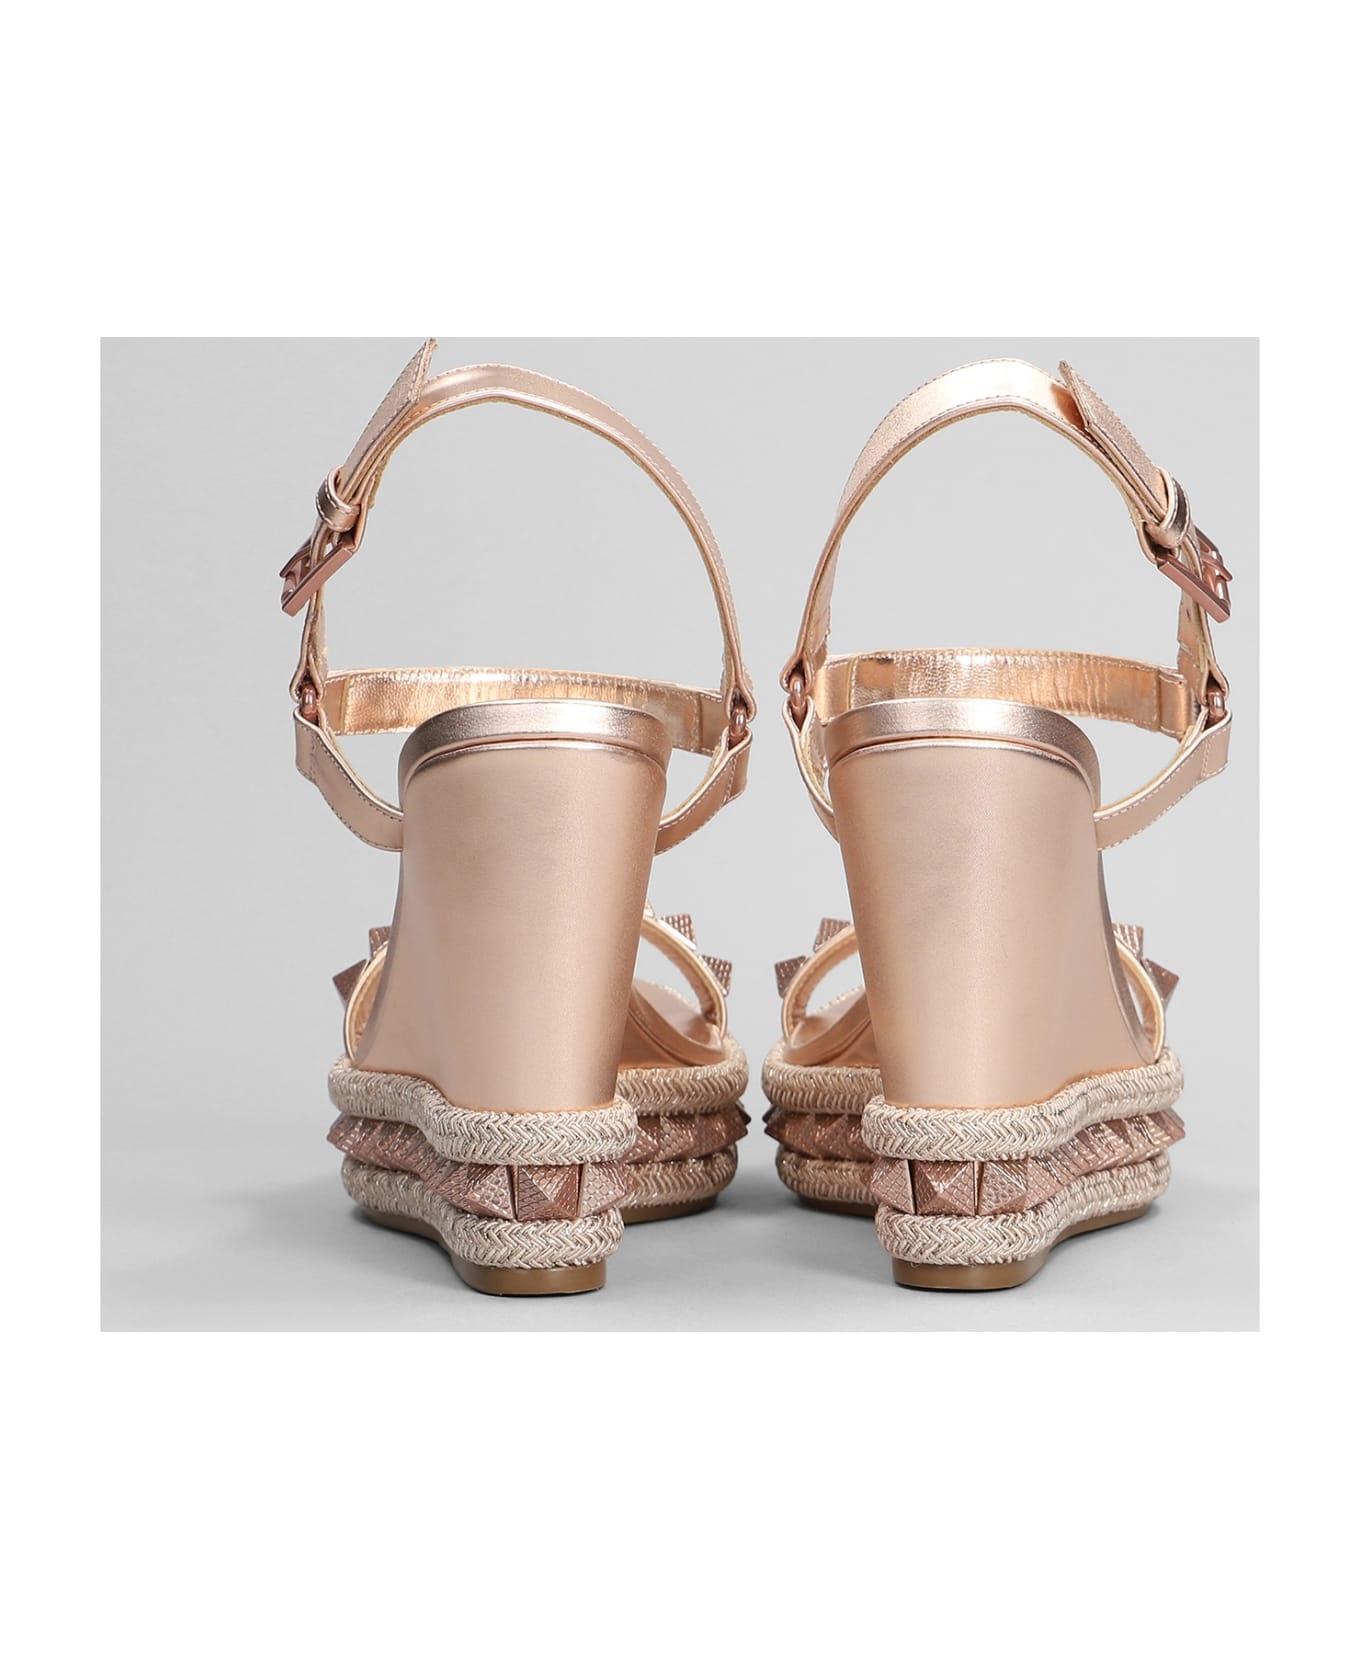 Pyraclou 110 Sandals In Rose-pink Leather - 4